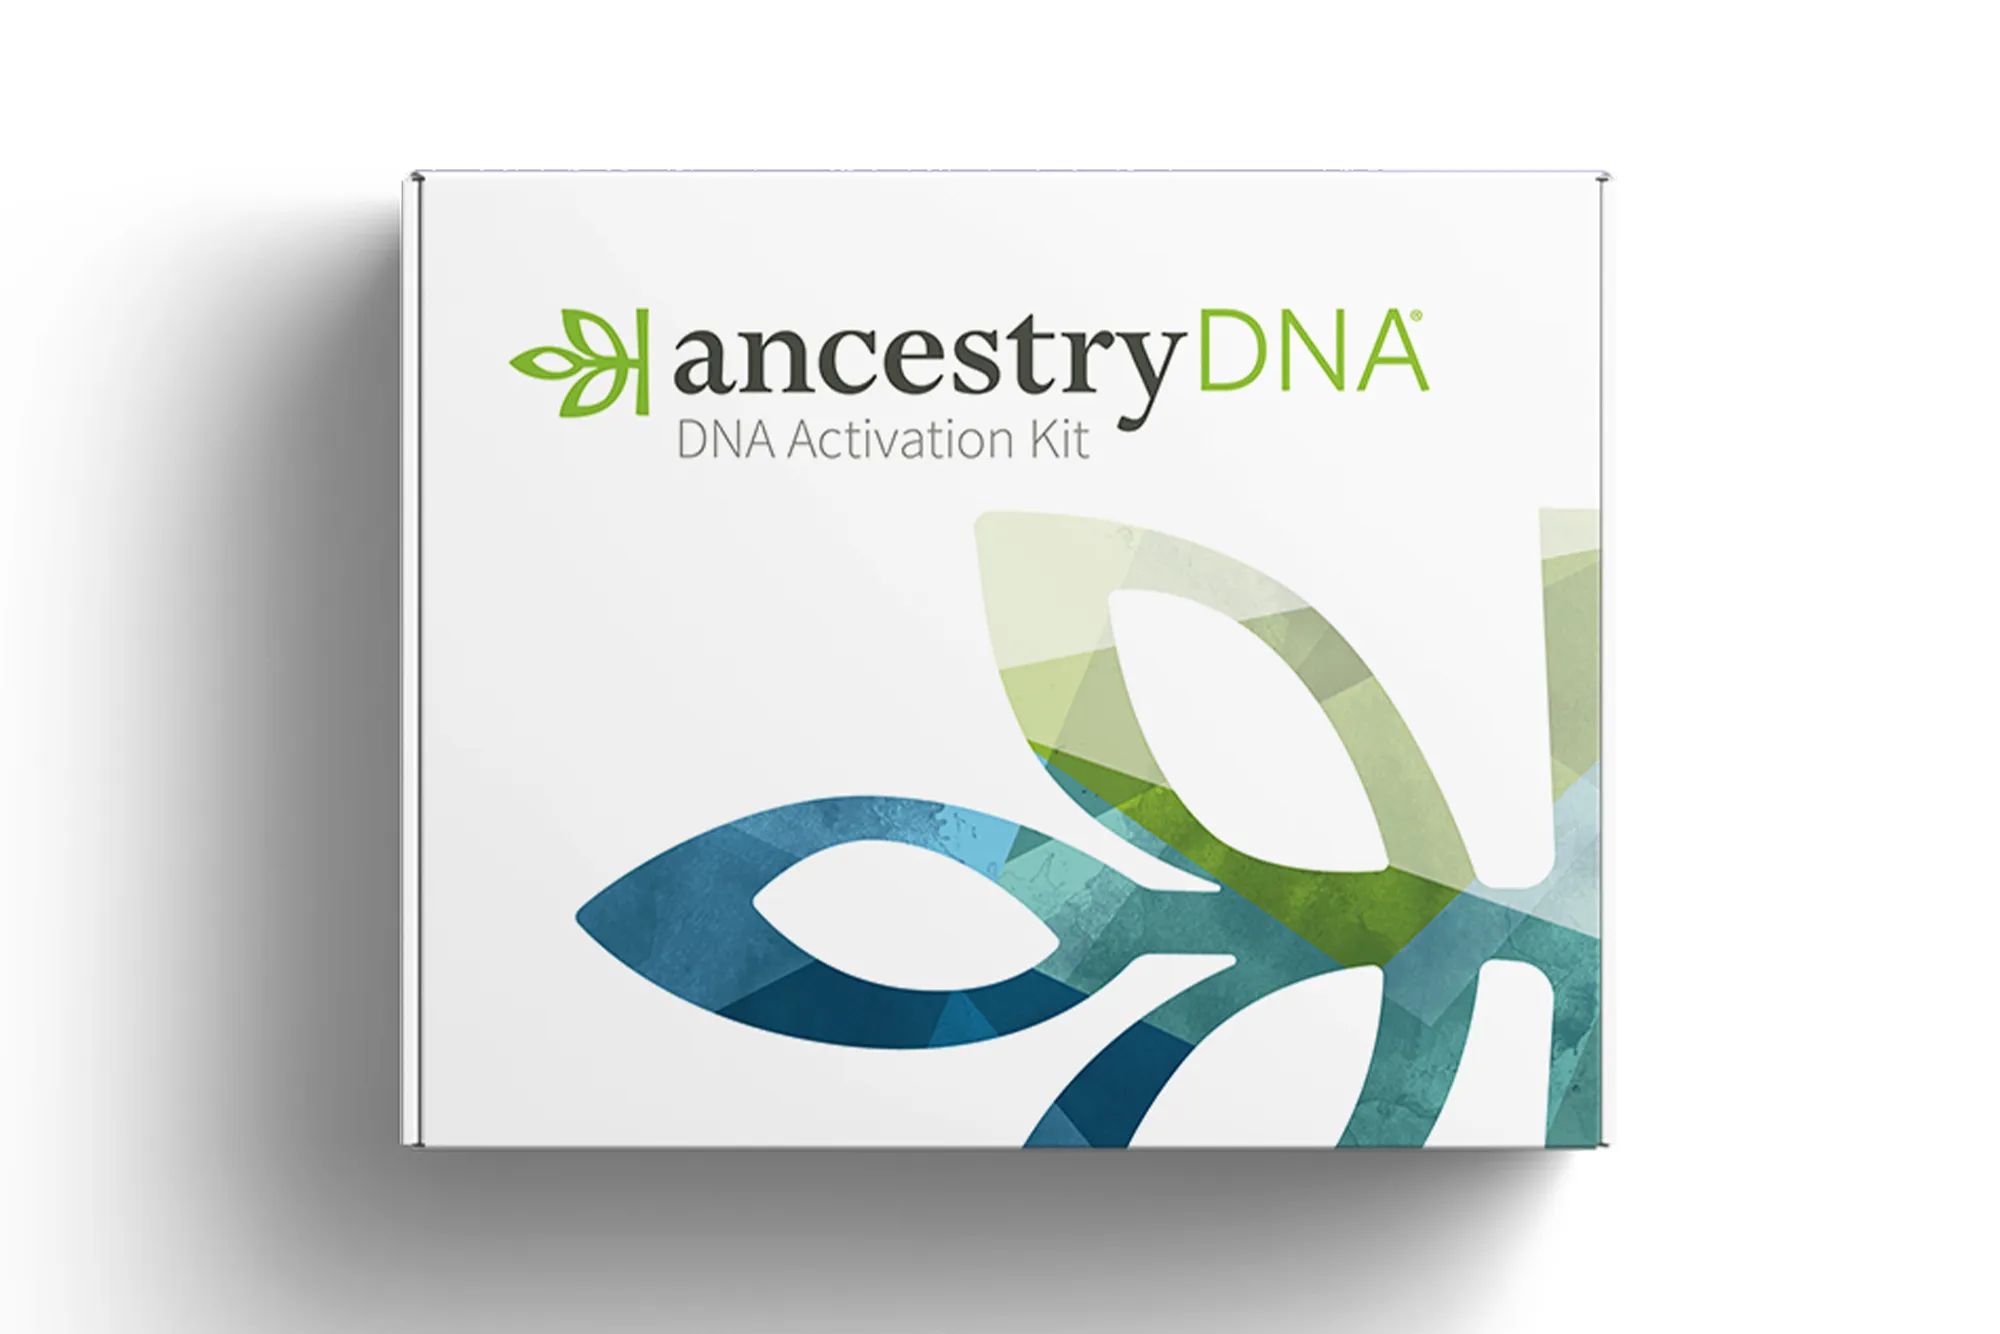 19-mind-blowing-facts-about-ancestry-com